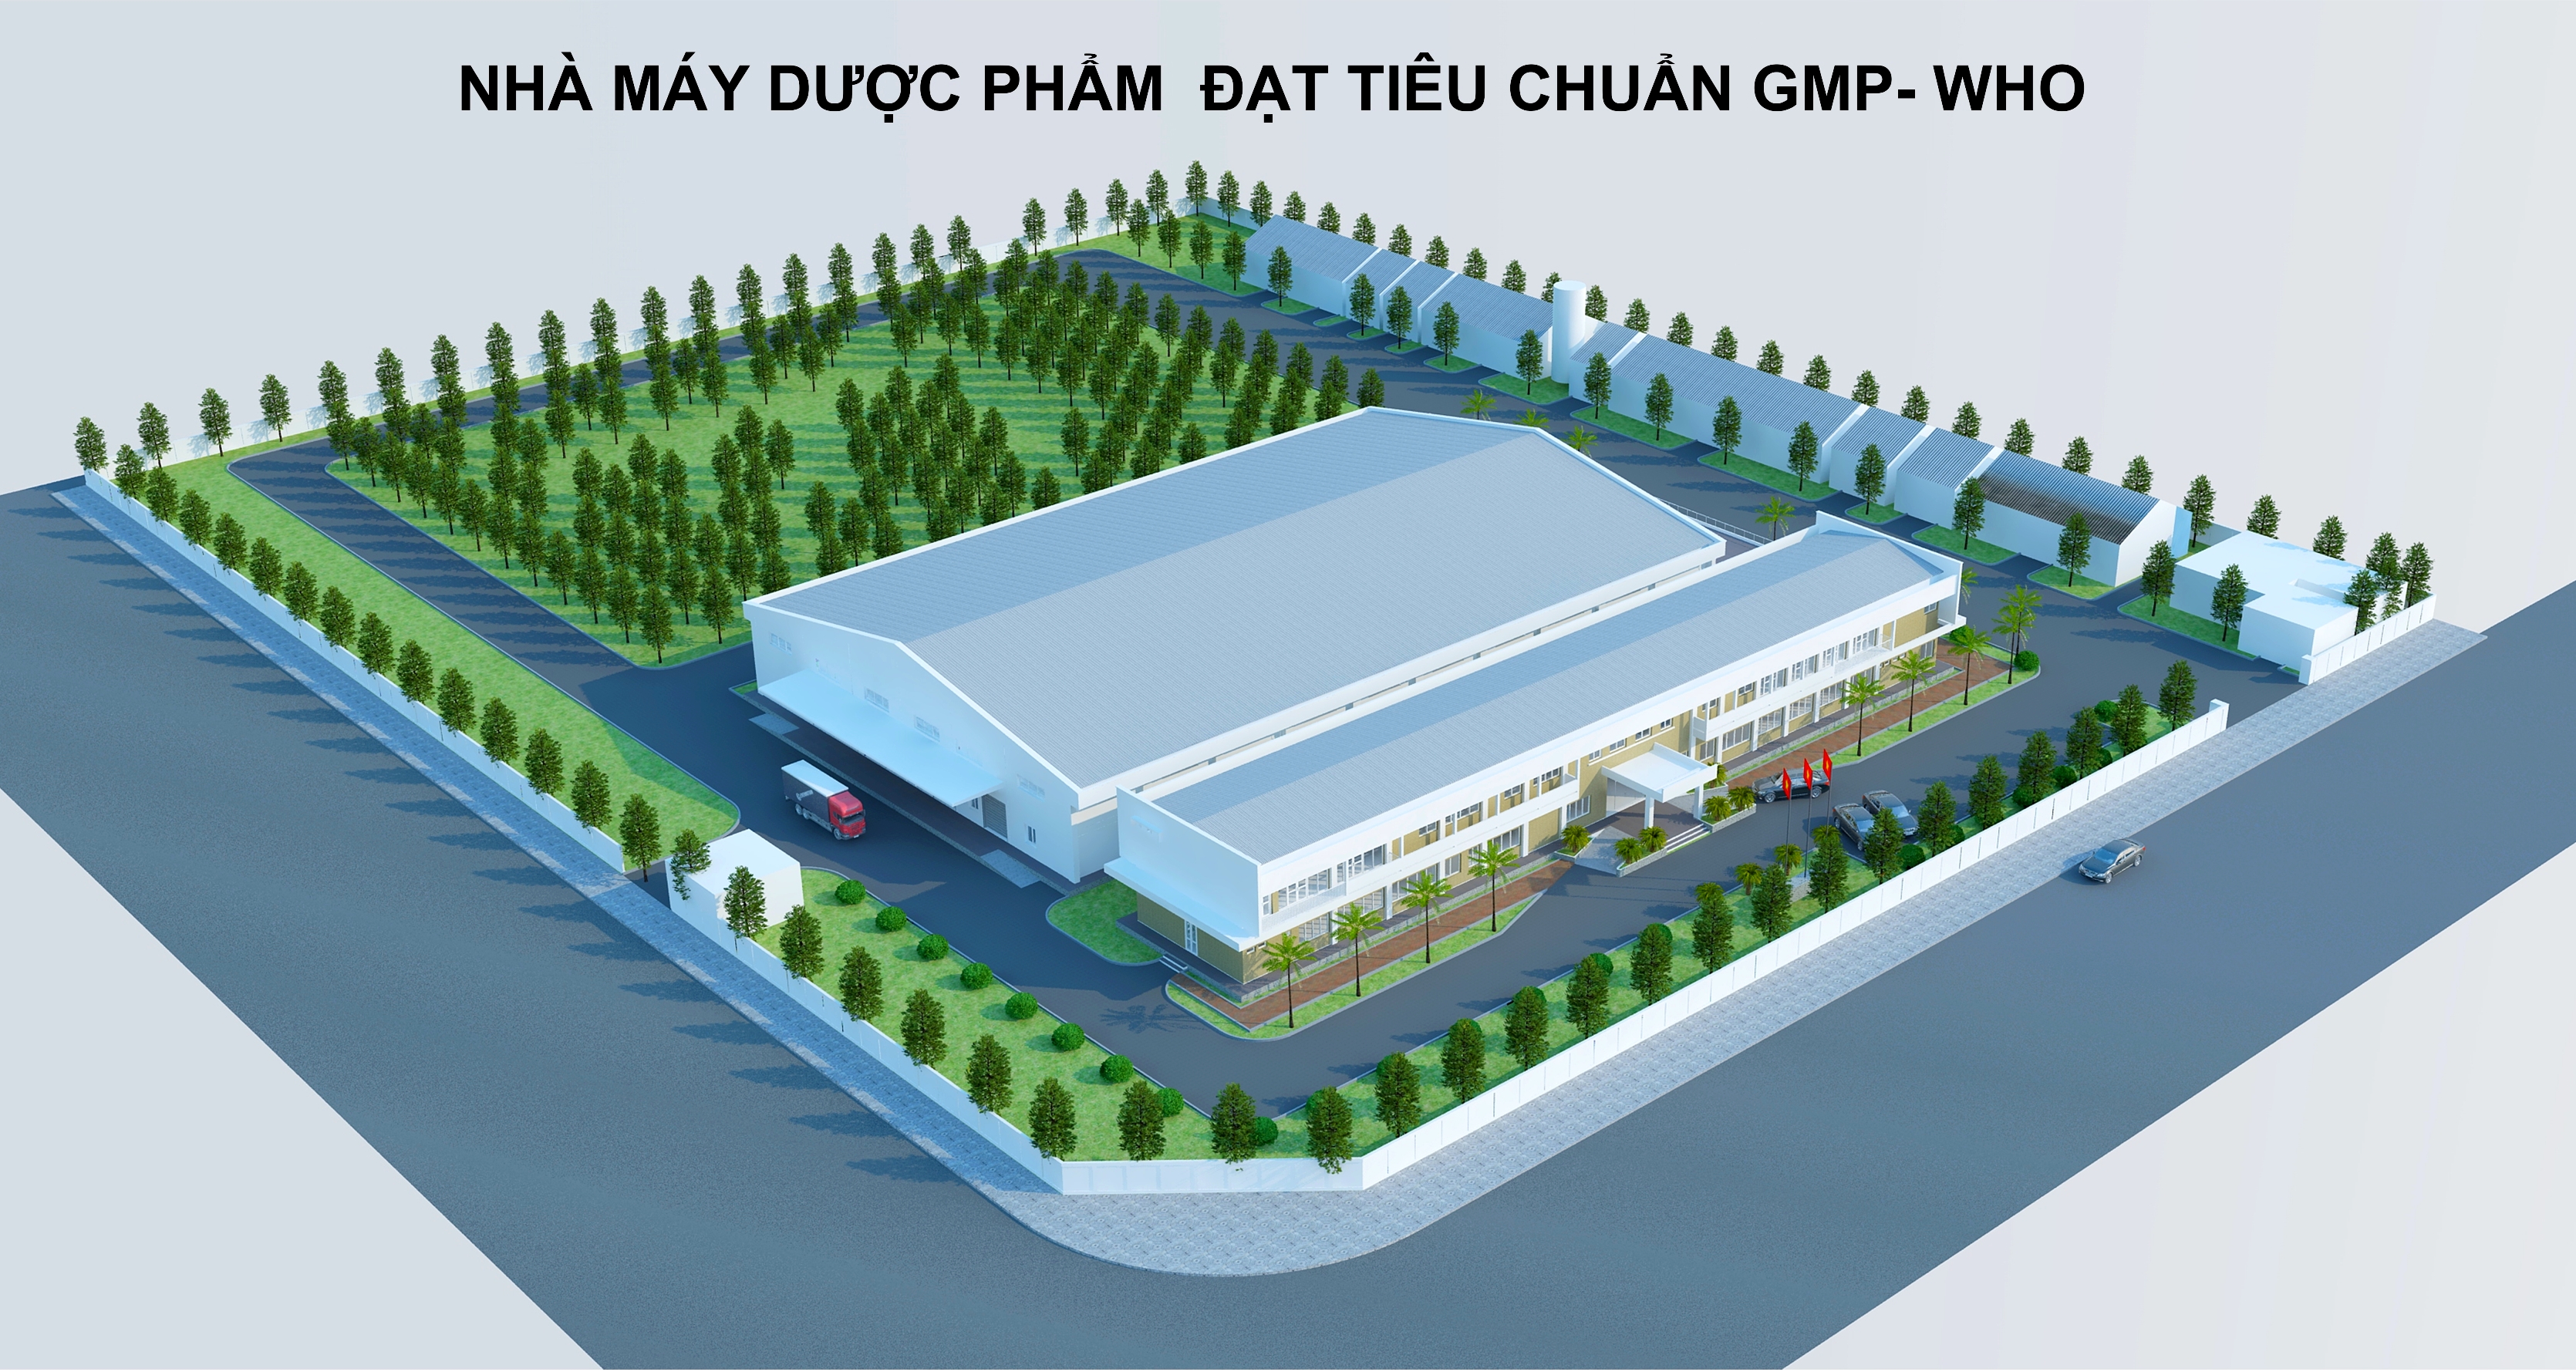 PHARMACEUTICAL PLANT REACH GMP-WHO STANDARDS